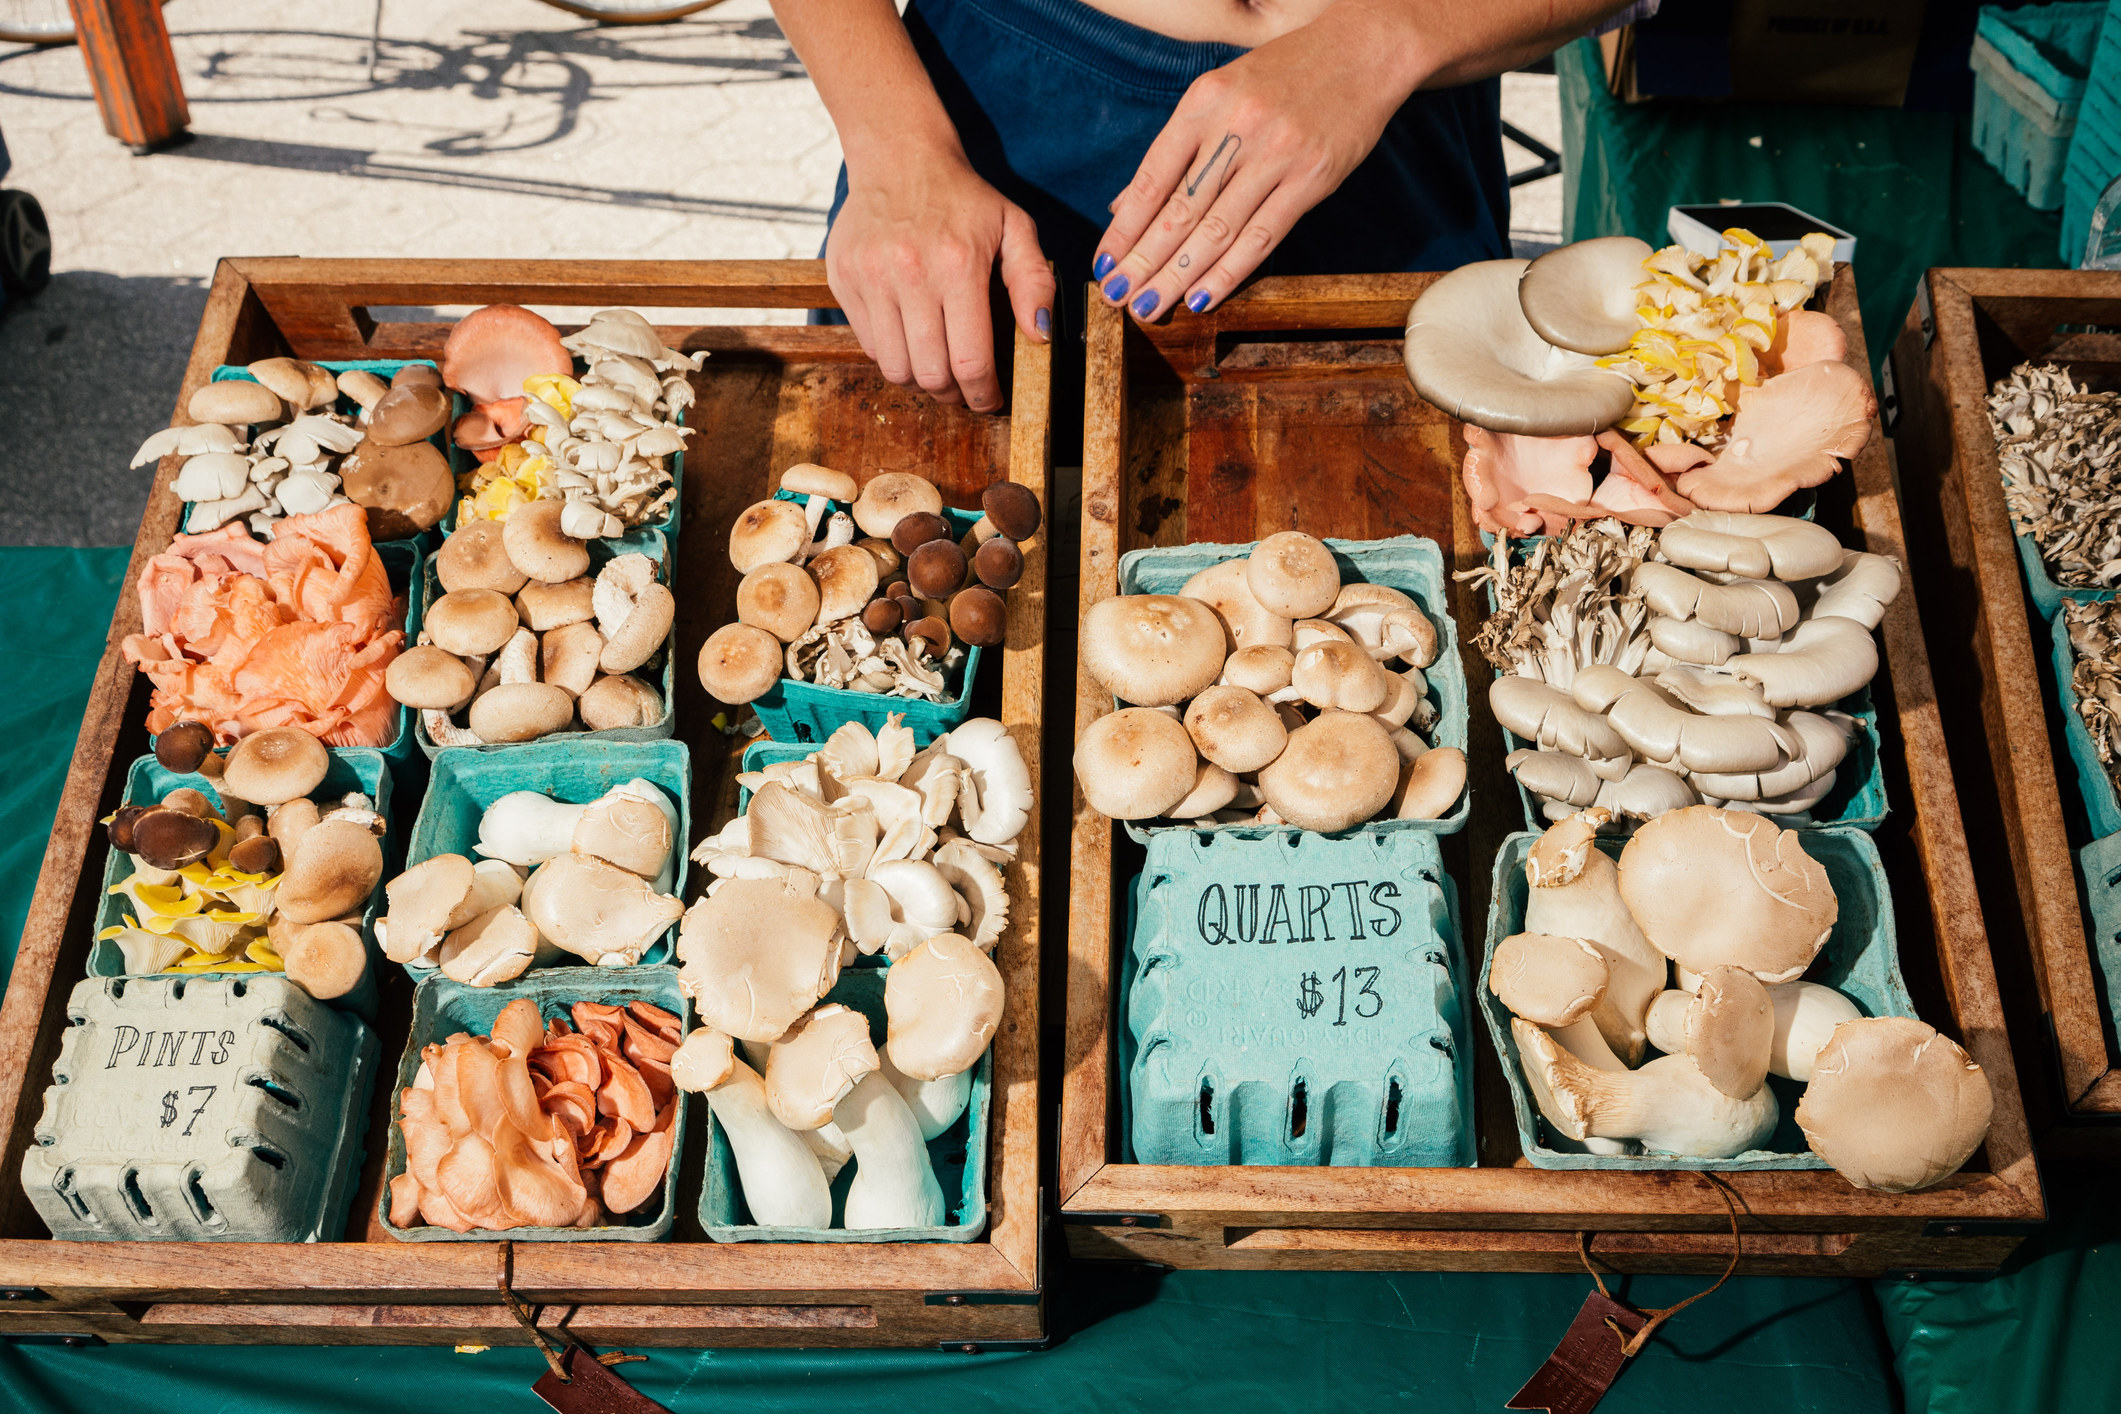 Various mushrooms for sale at a market.